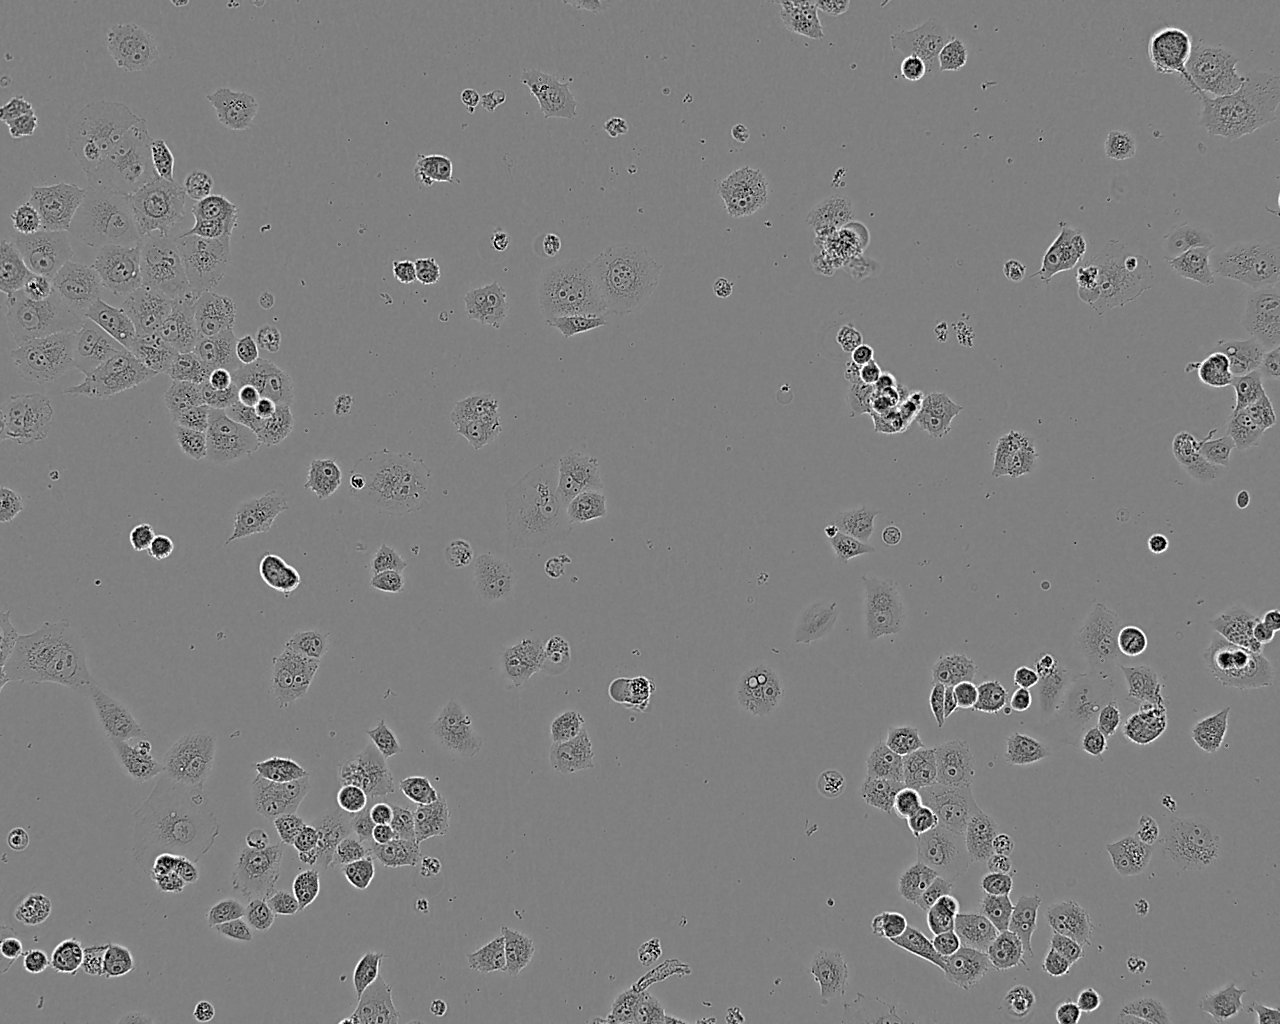 SK-RC-42 Cell:人肾癌细胞系,SK-RC-42 Cell